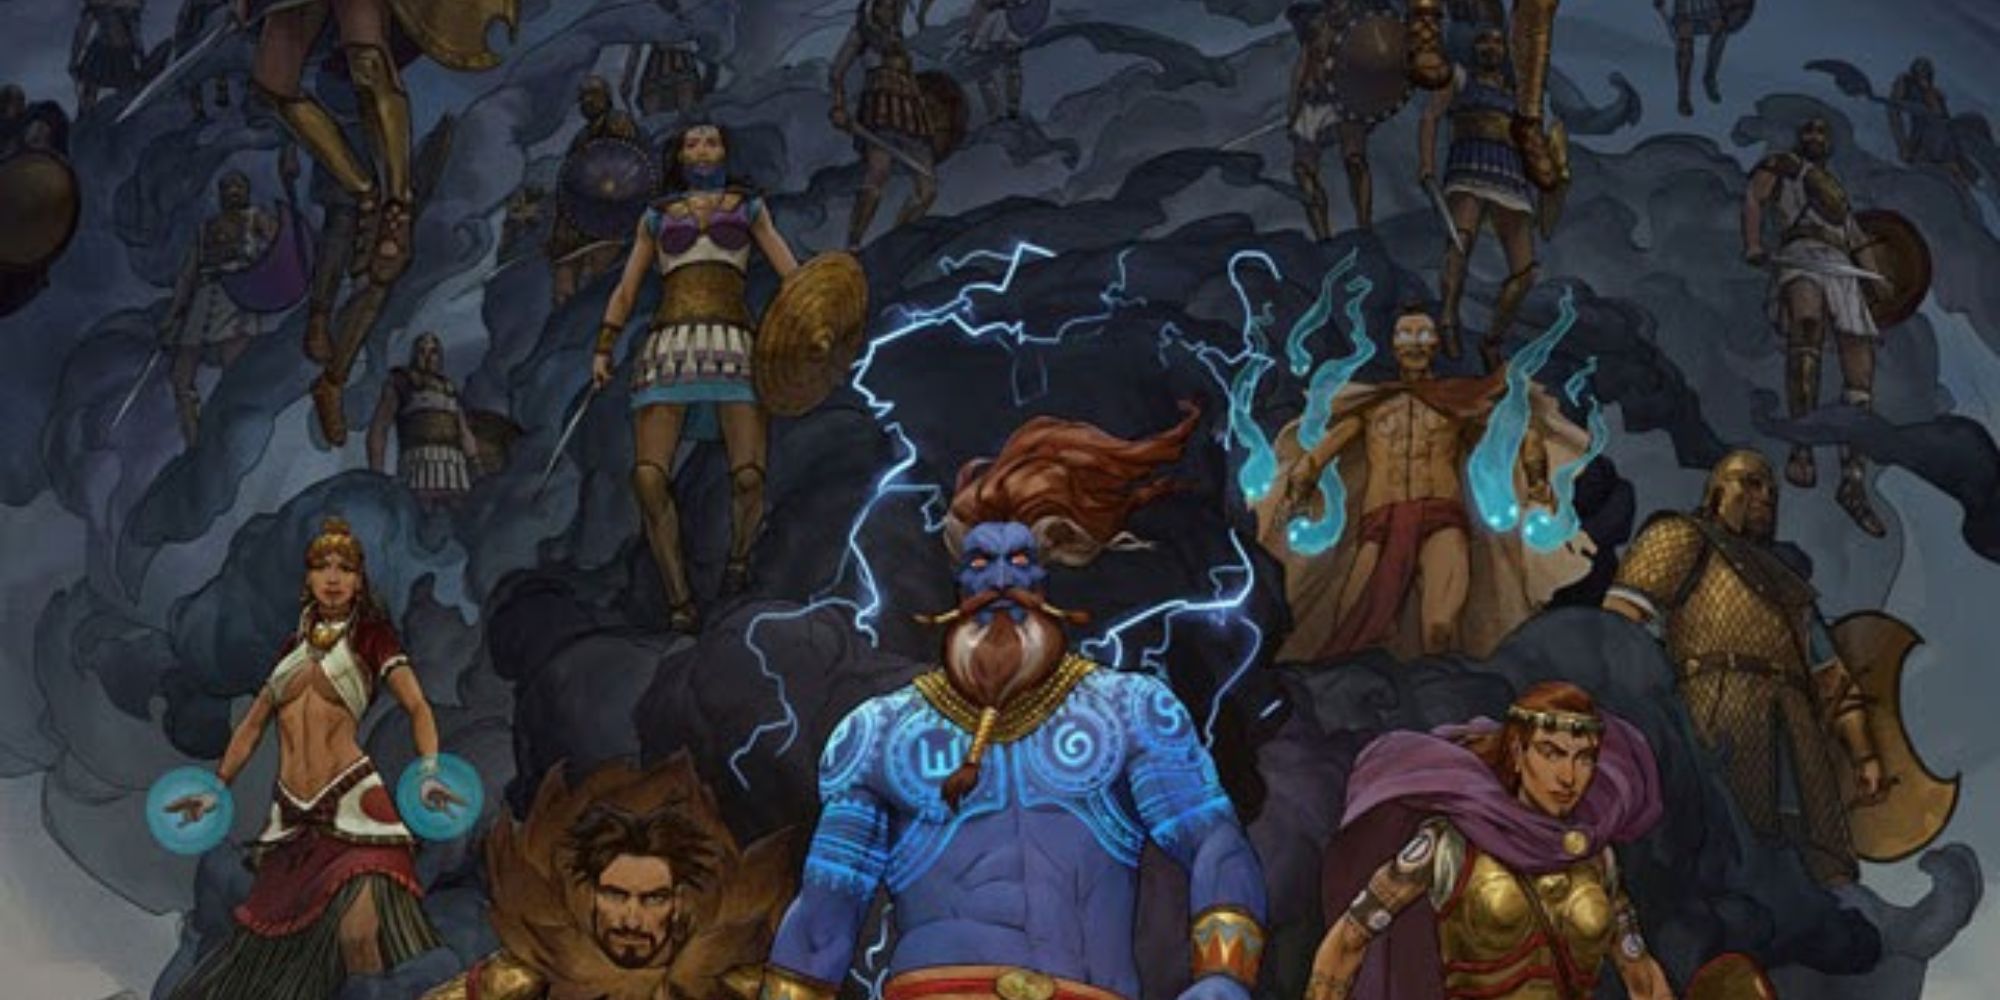 Runequest Art Of Various Gods Coming Out Of Stormclouds